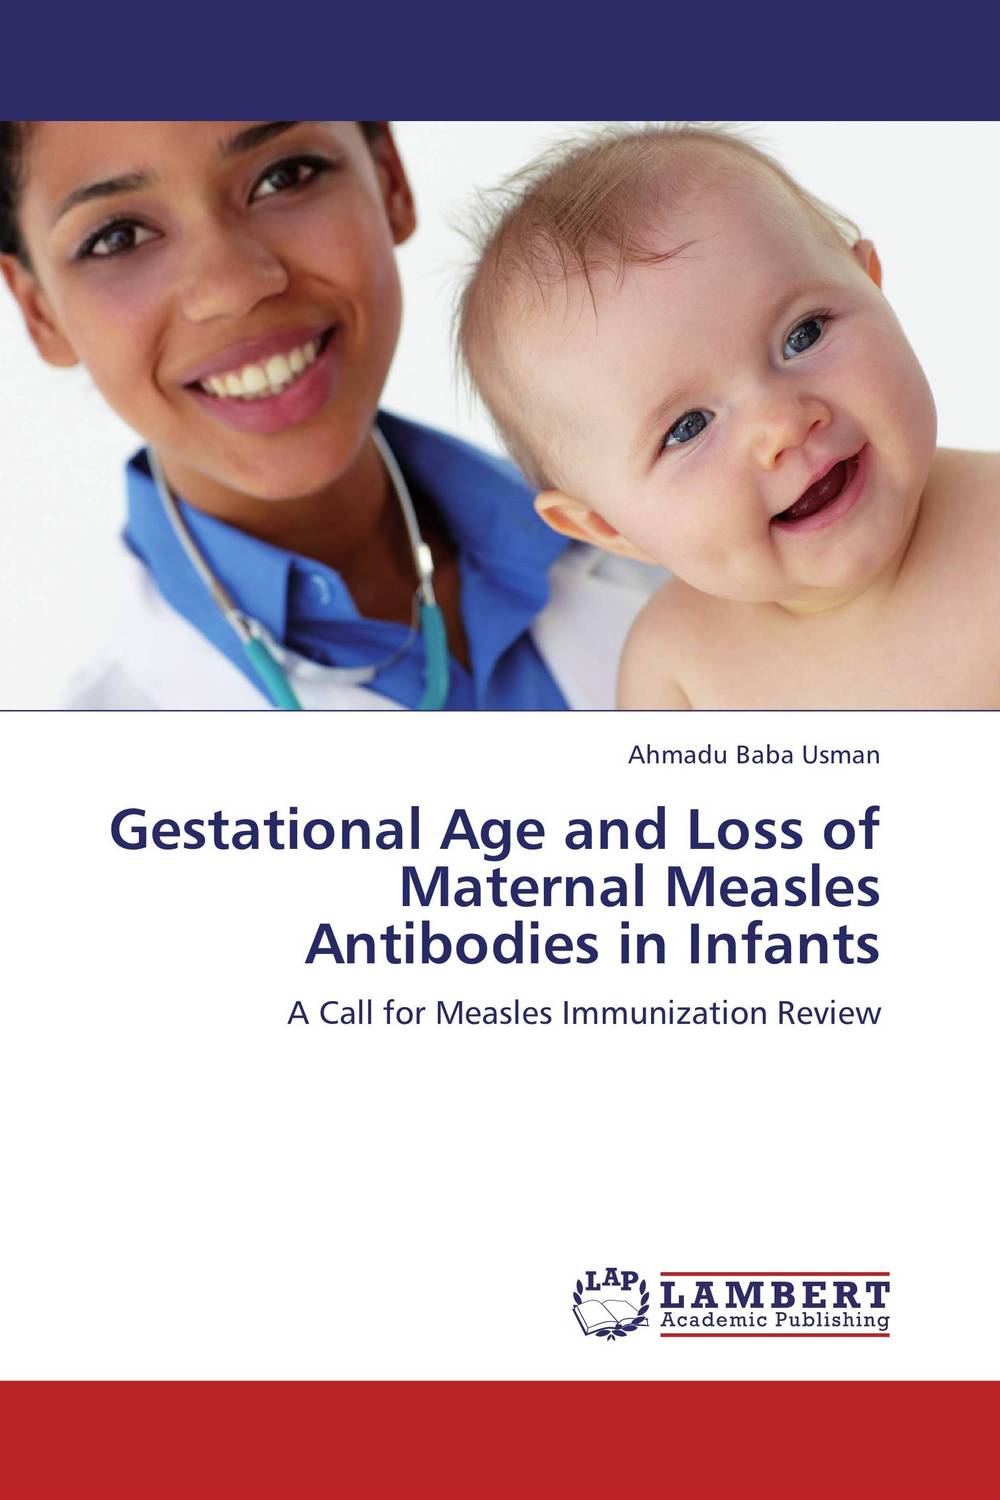 Gestational Age and Loss of Maternal Measles Antibodies in Infants